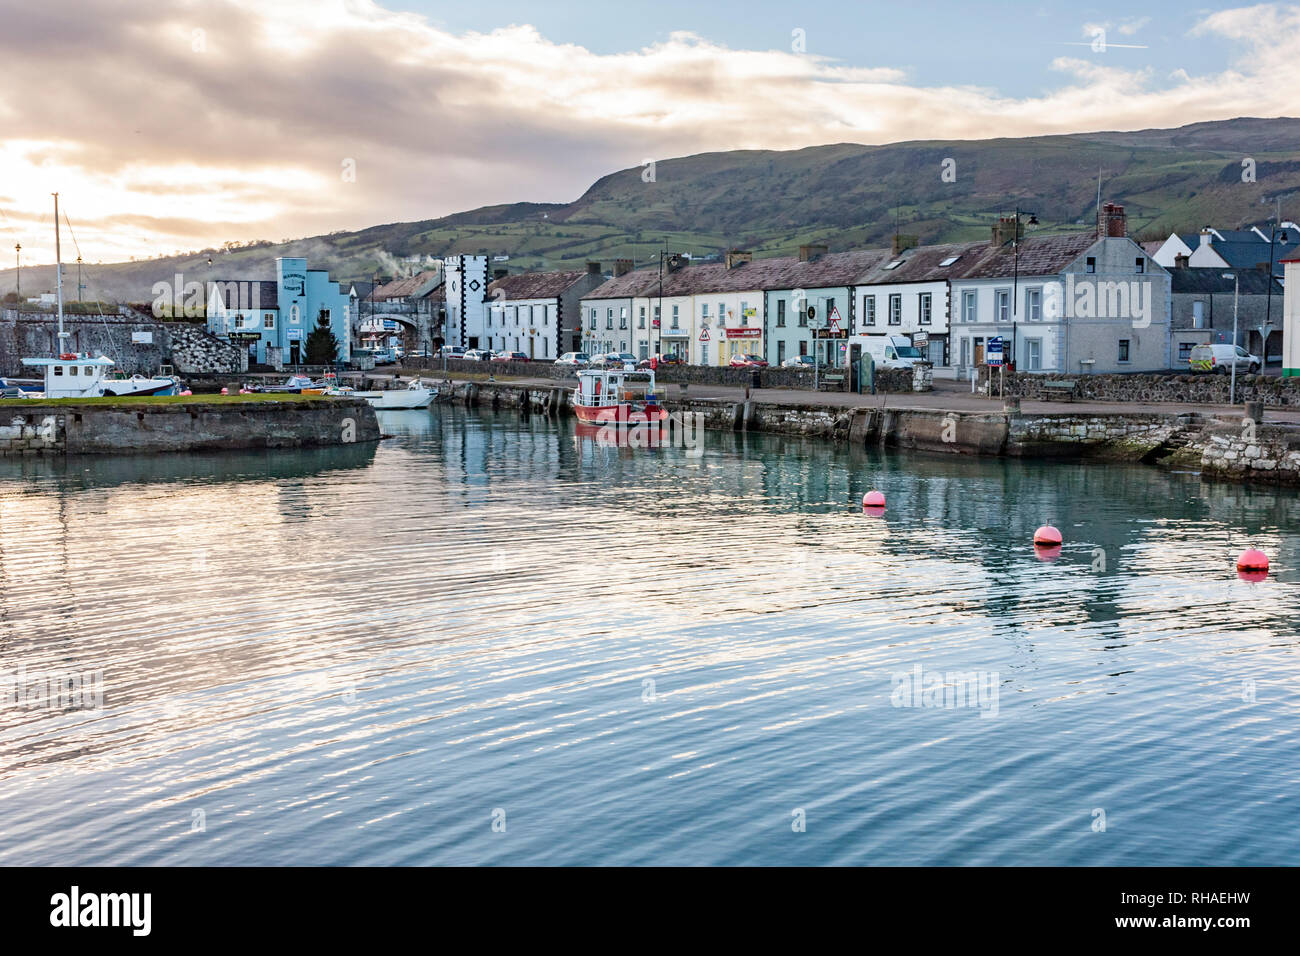 Picturesque port on the shores of Carnlough Bay. Typical village in Northern Ireland. Stock Photo